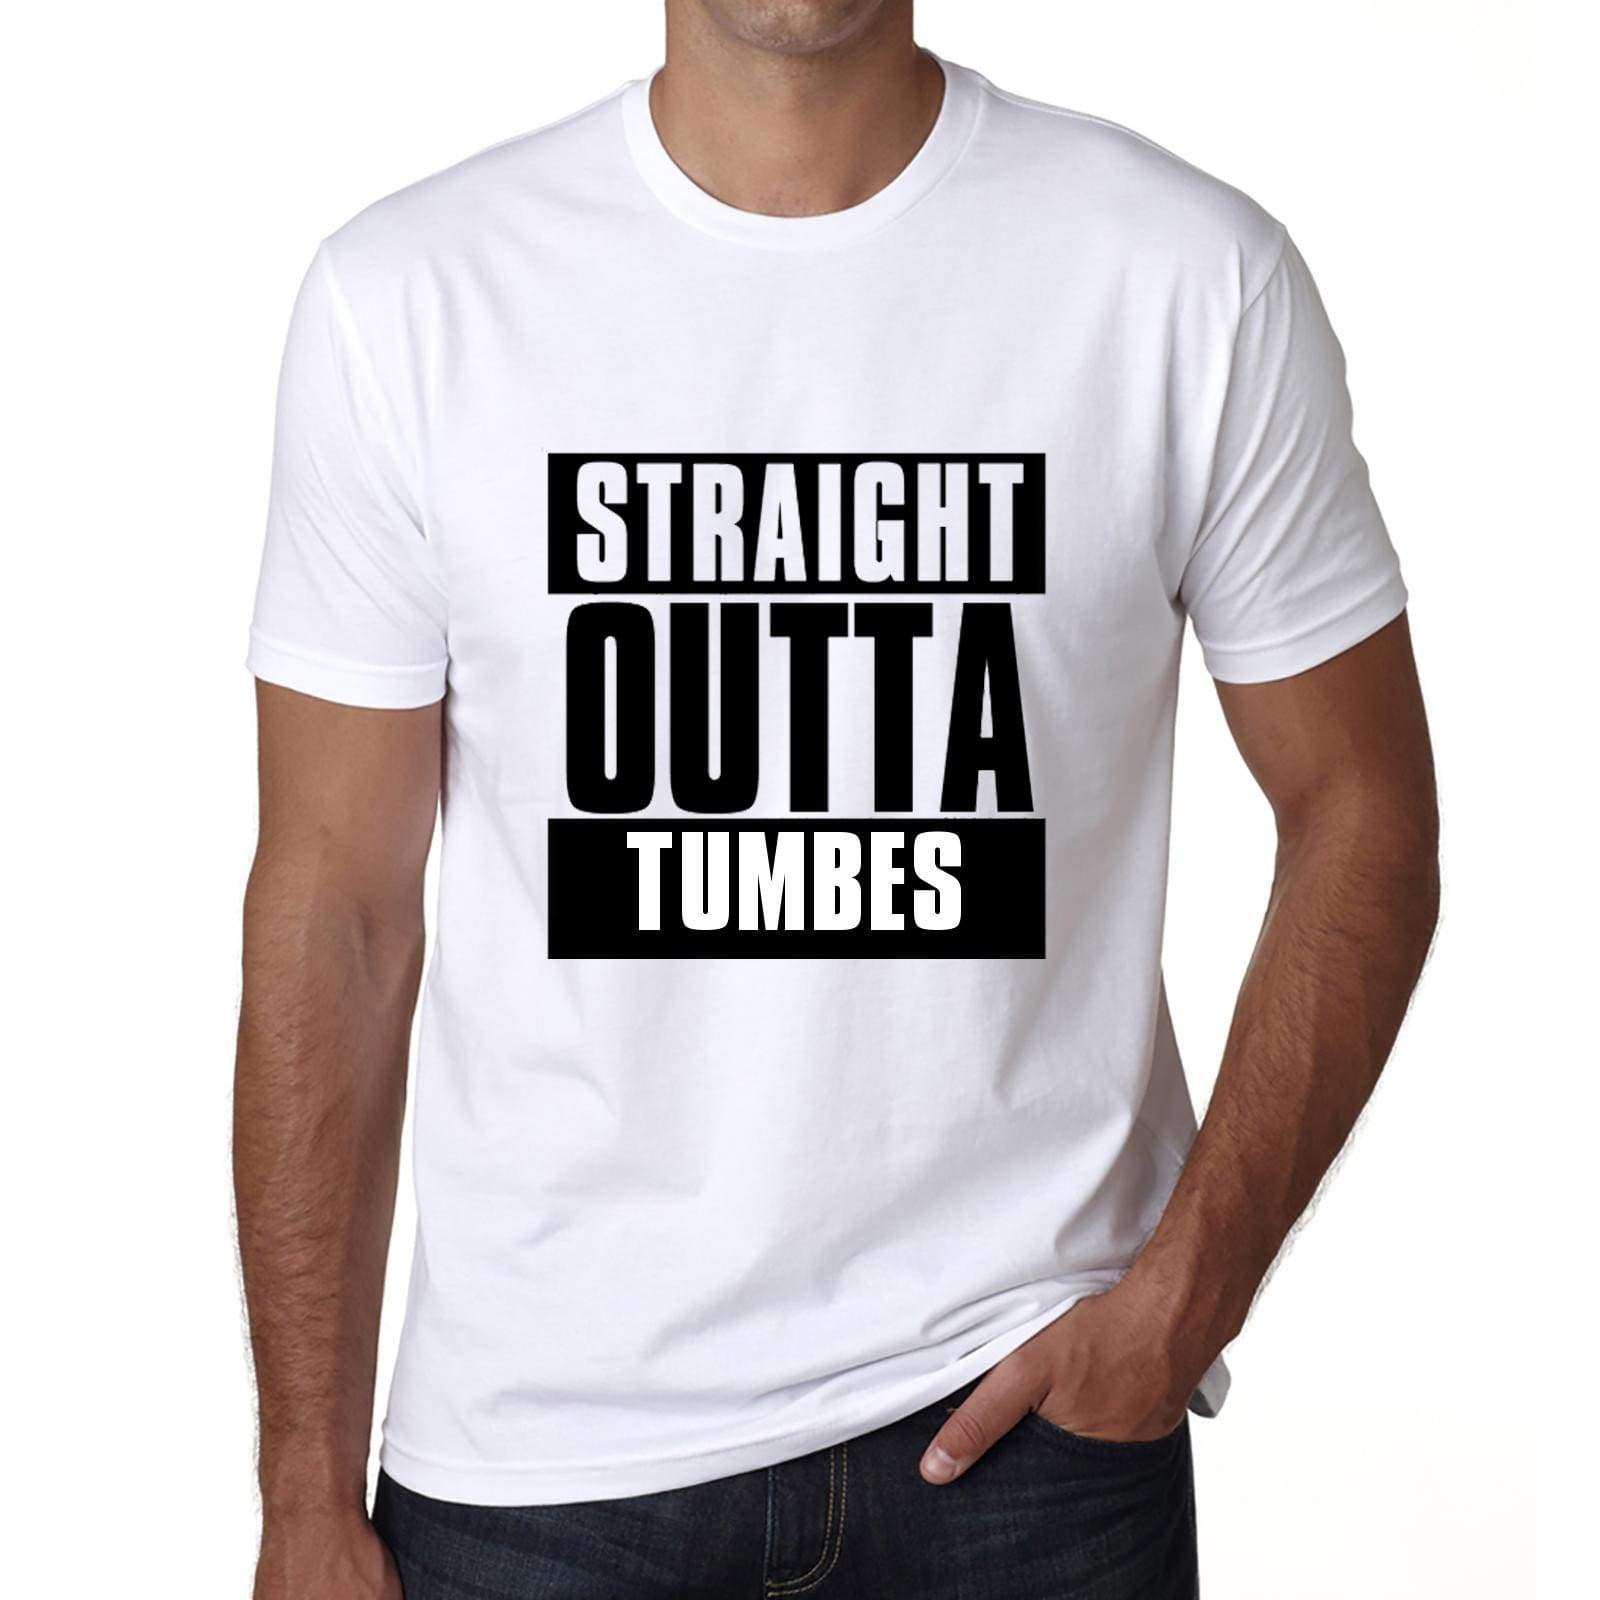 Straight Outta Tumbes Mens Short Sleeve Round Neck T-Shirt 00027 - White / S - Casual